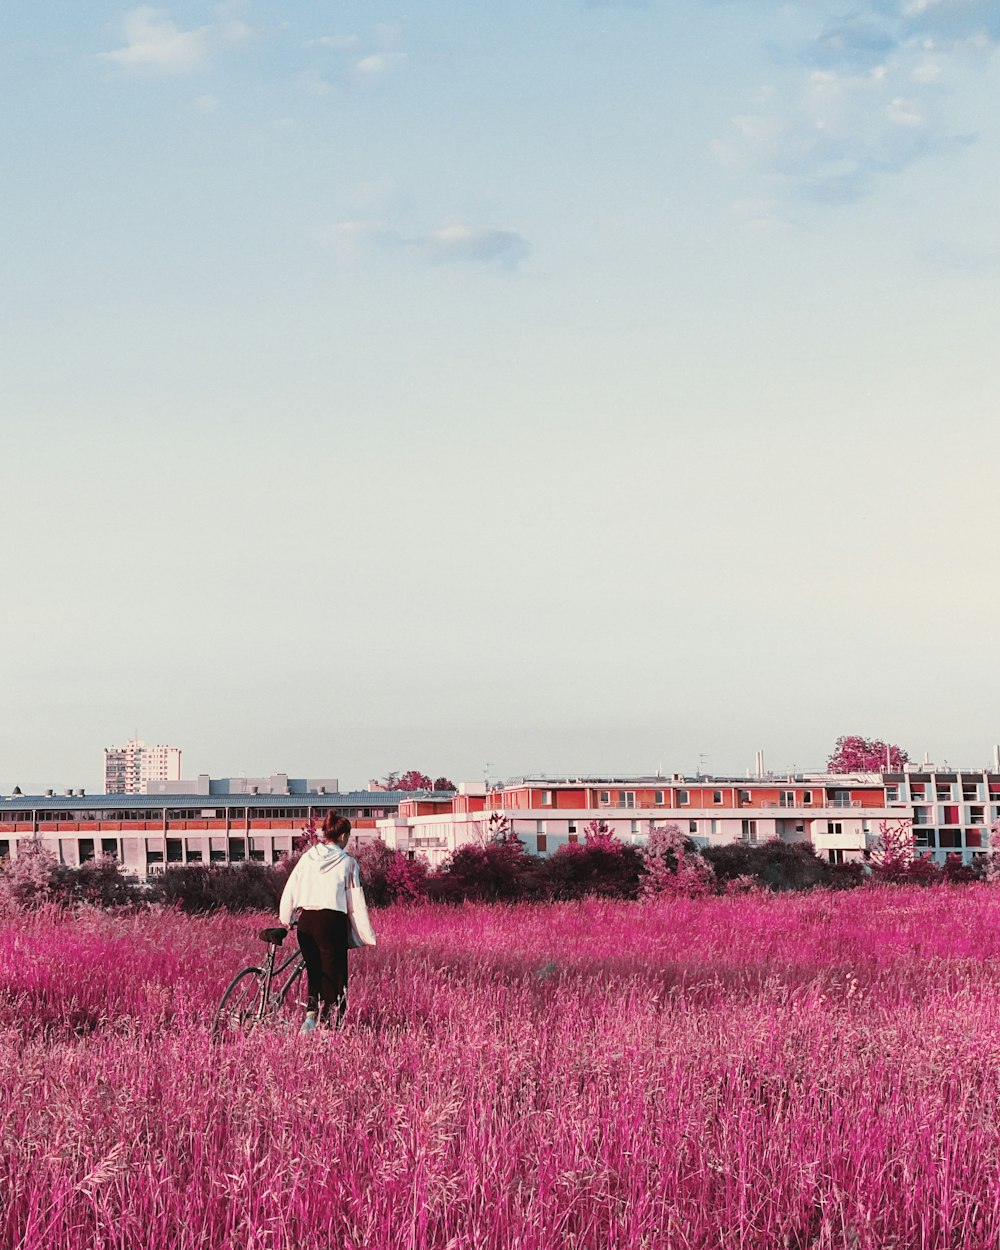 man and woman walking on purple flower field during daytime